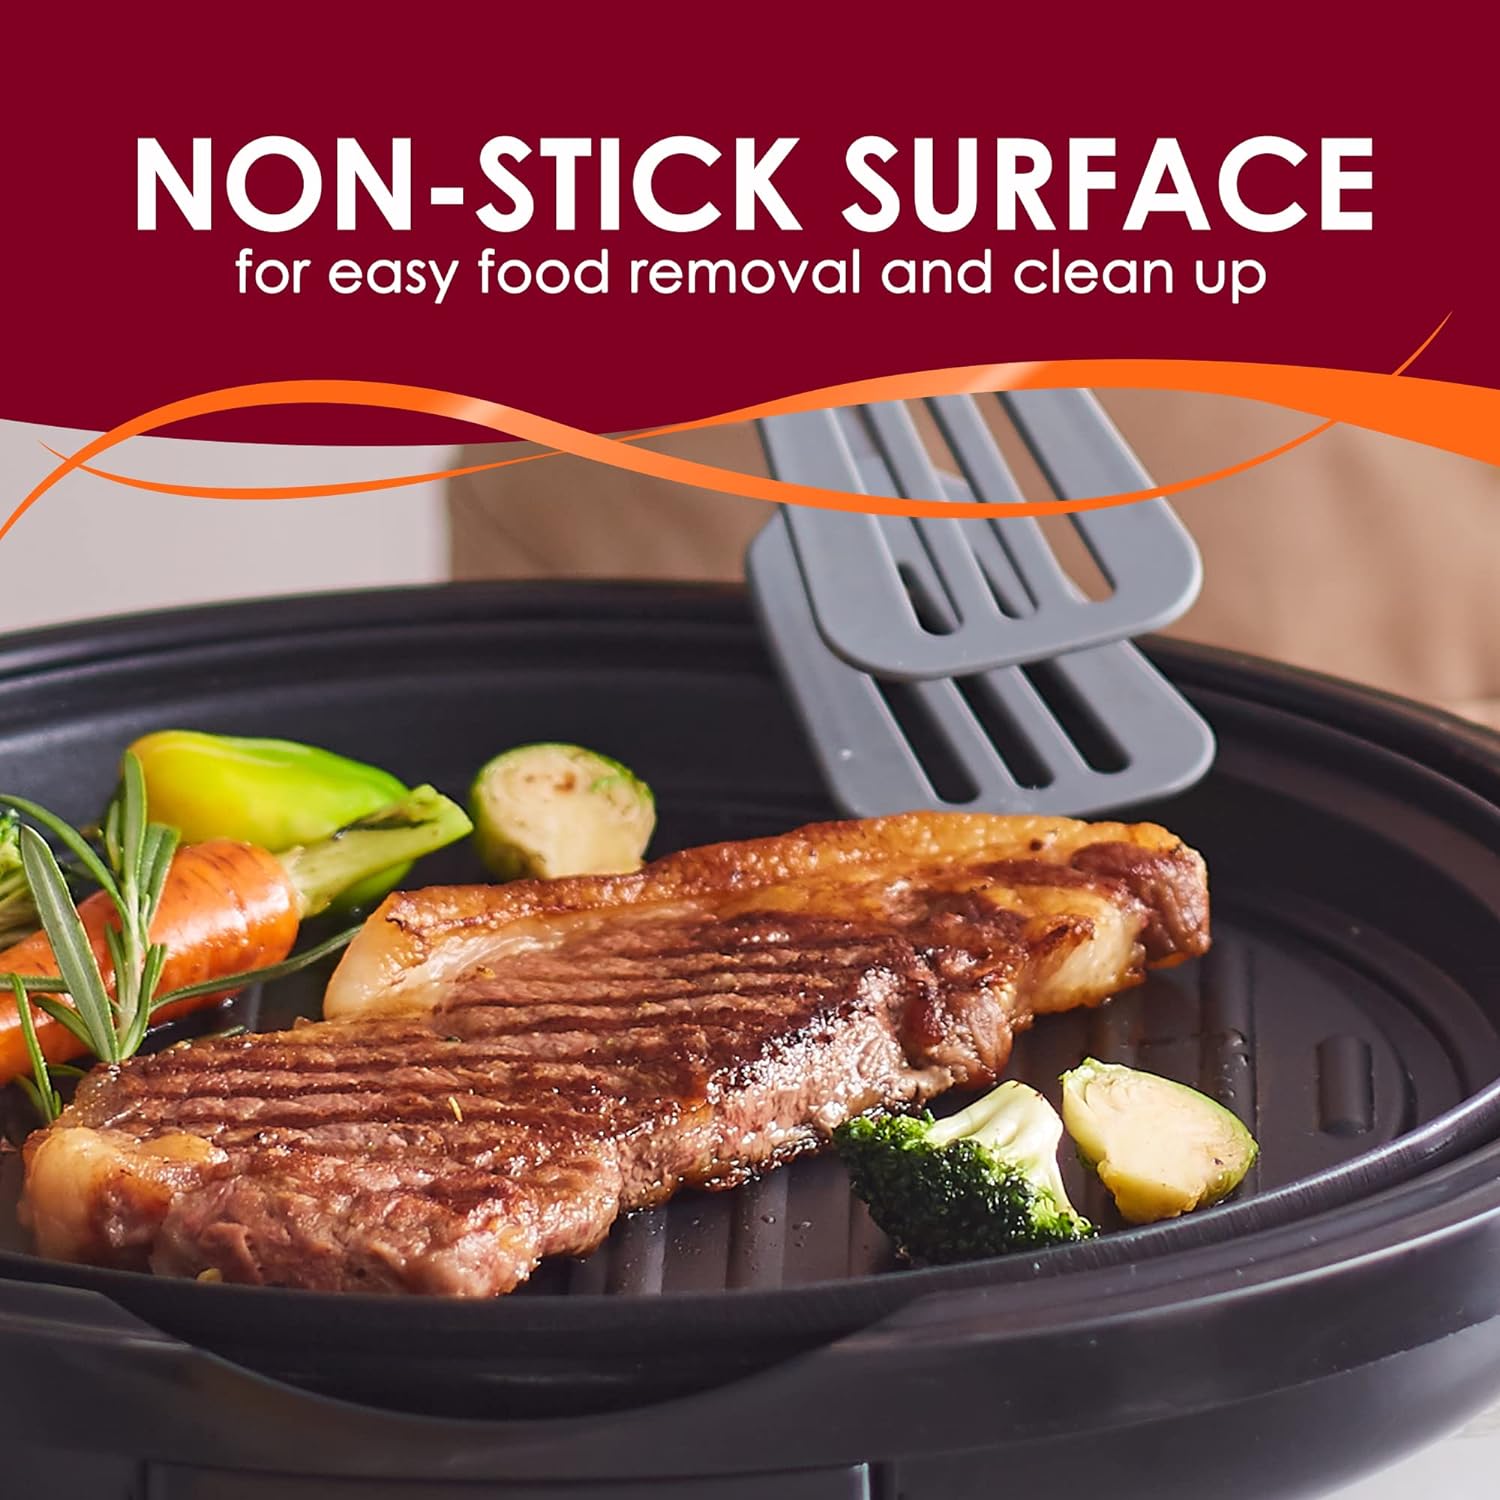 Elite Gourmet EMG1100 Electric Indoor Nonstick Grill, Dishwasher Safe, Cool Touch, Fast Heat Up Ideal Low-Fat Meals, Includes Tempered Glass Lid, 11, Black - Elite Gourmet EMG1100 Electric Indoor Nonstick Grill Review